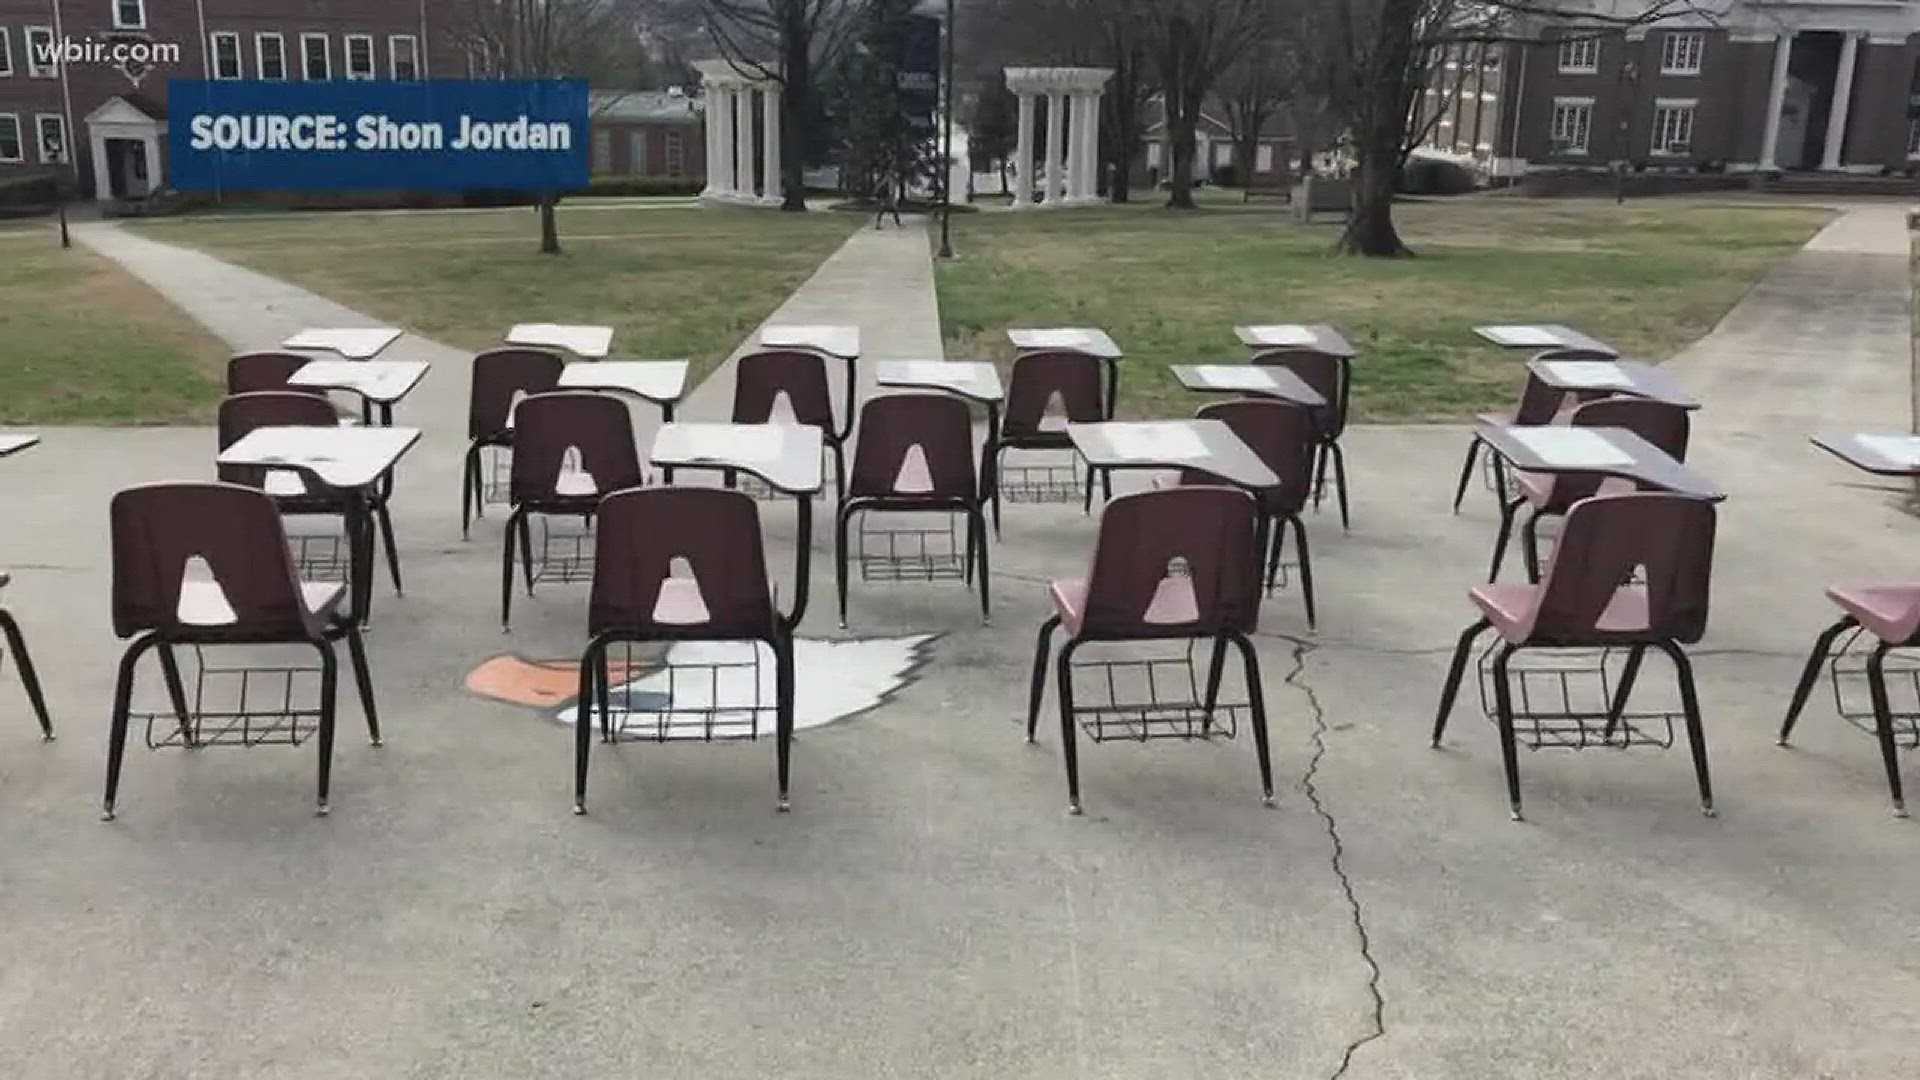 Feb. 20, 2018: A Carson-Newman University student used 17 empty desks to urge conversations about gun violence after a mass shooting at a Florida high school.